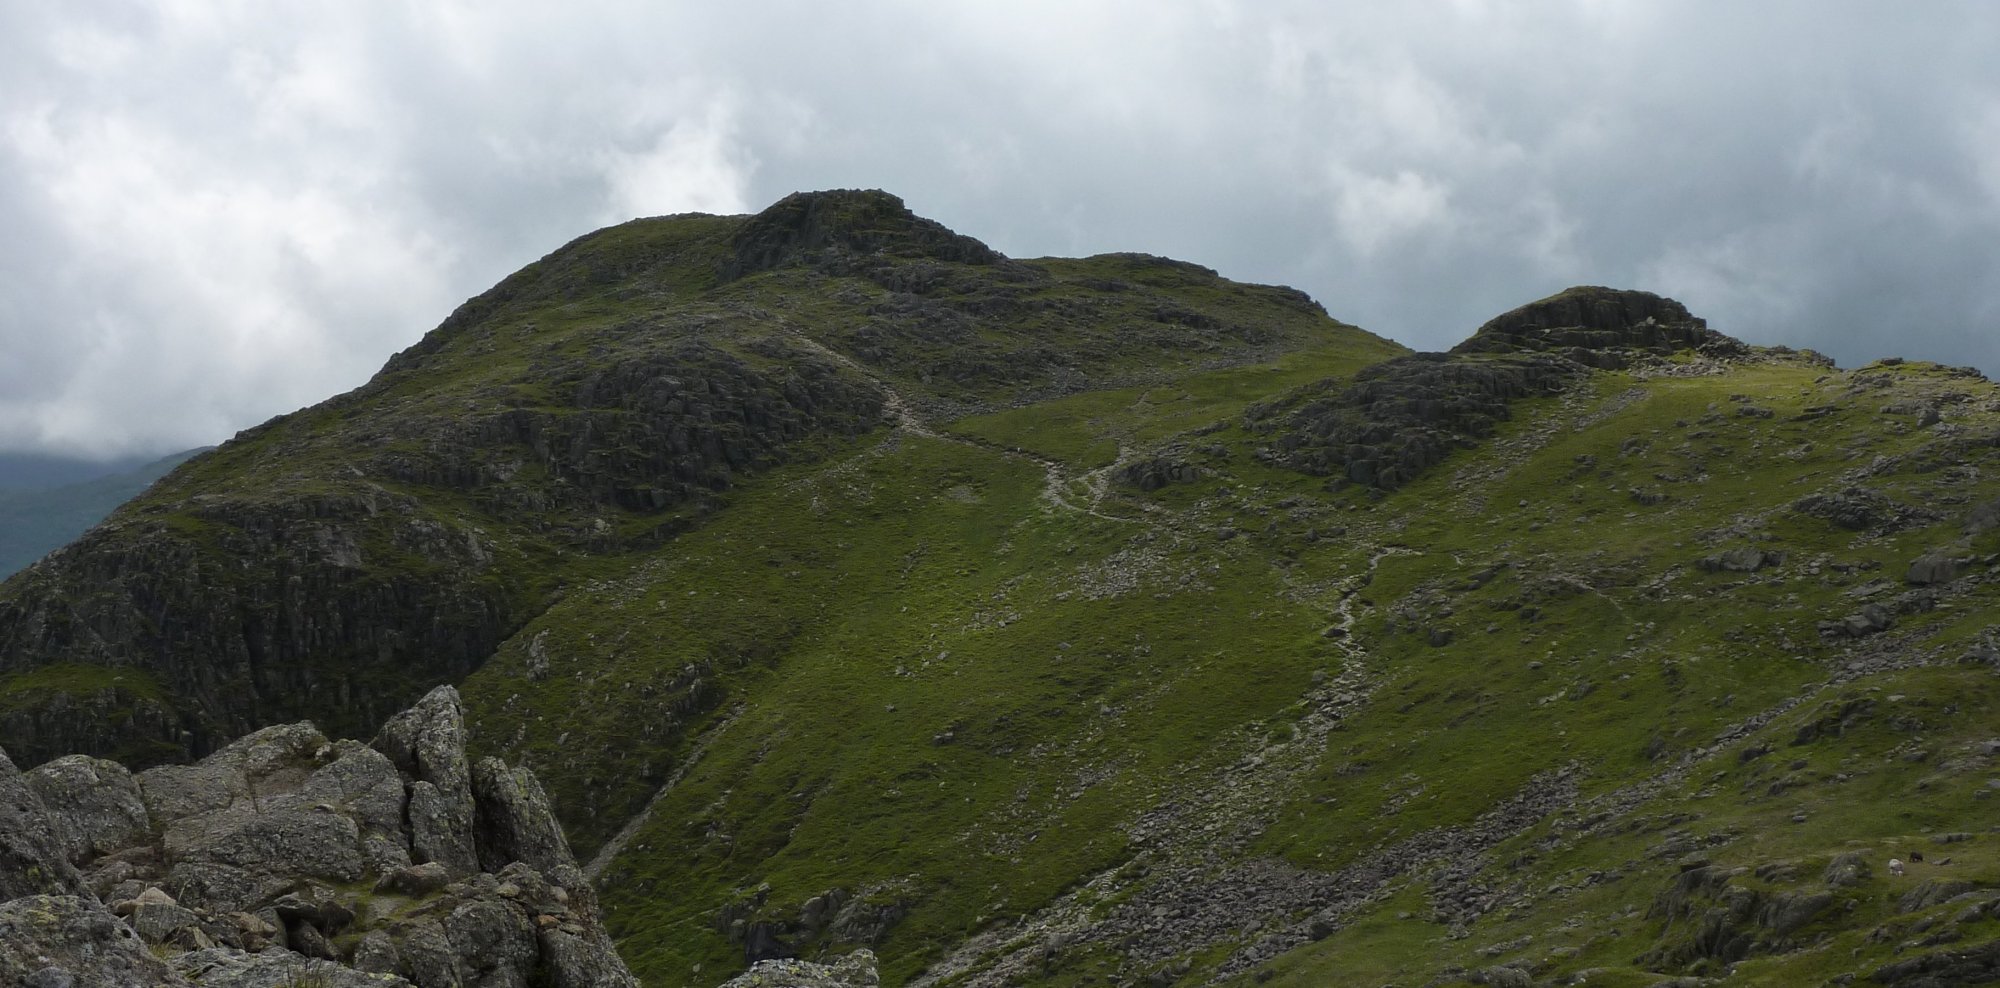 Looking across to Harrison Stickle from my lunch spot